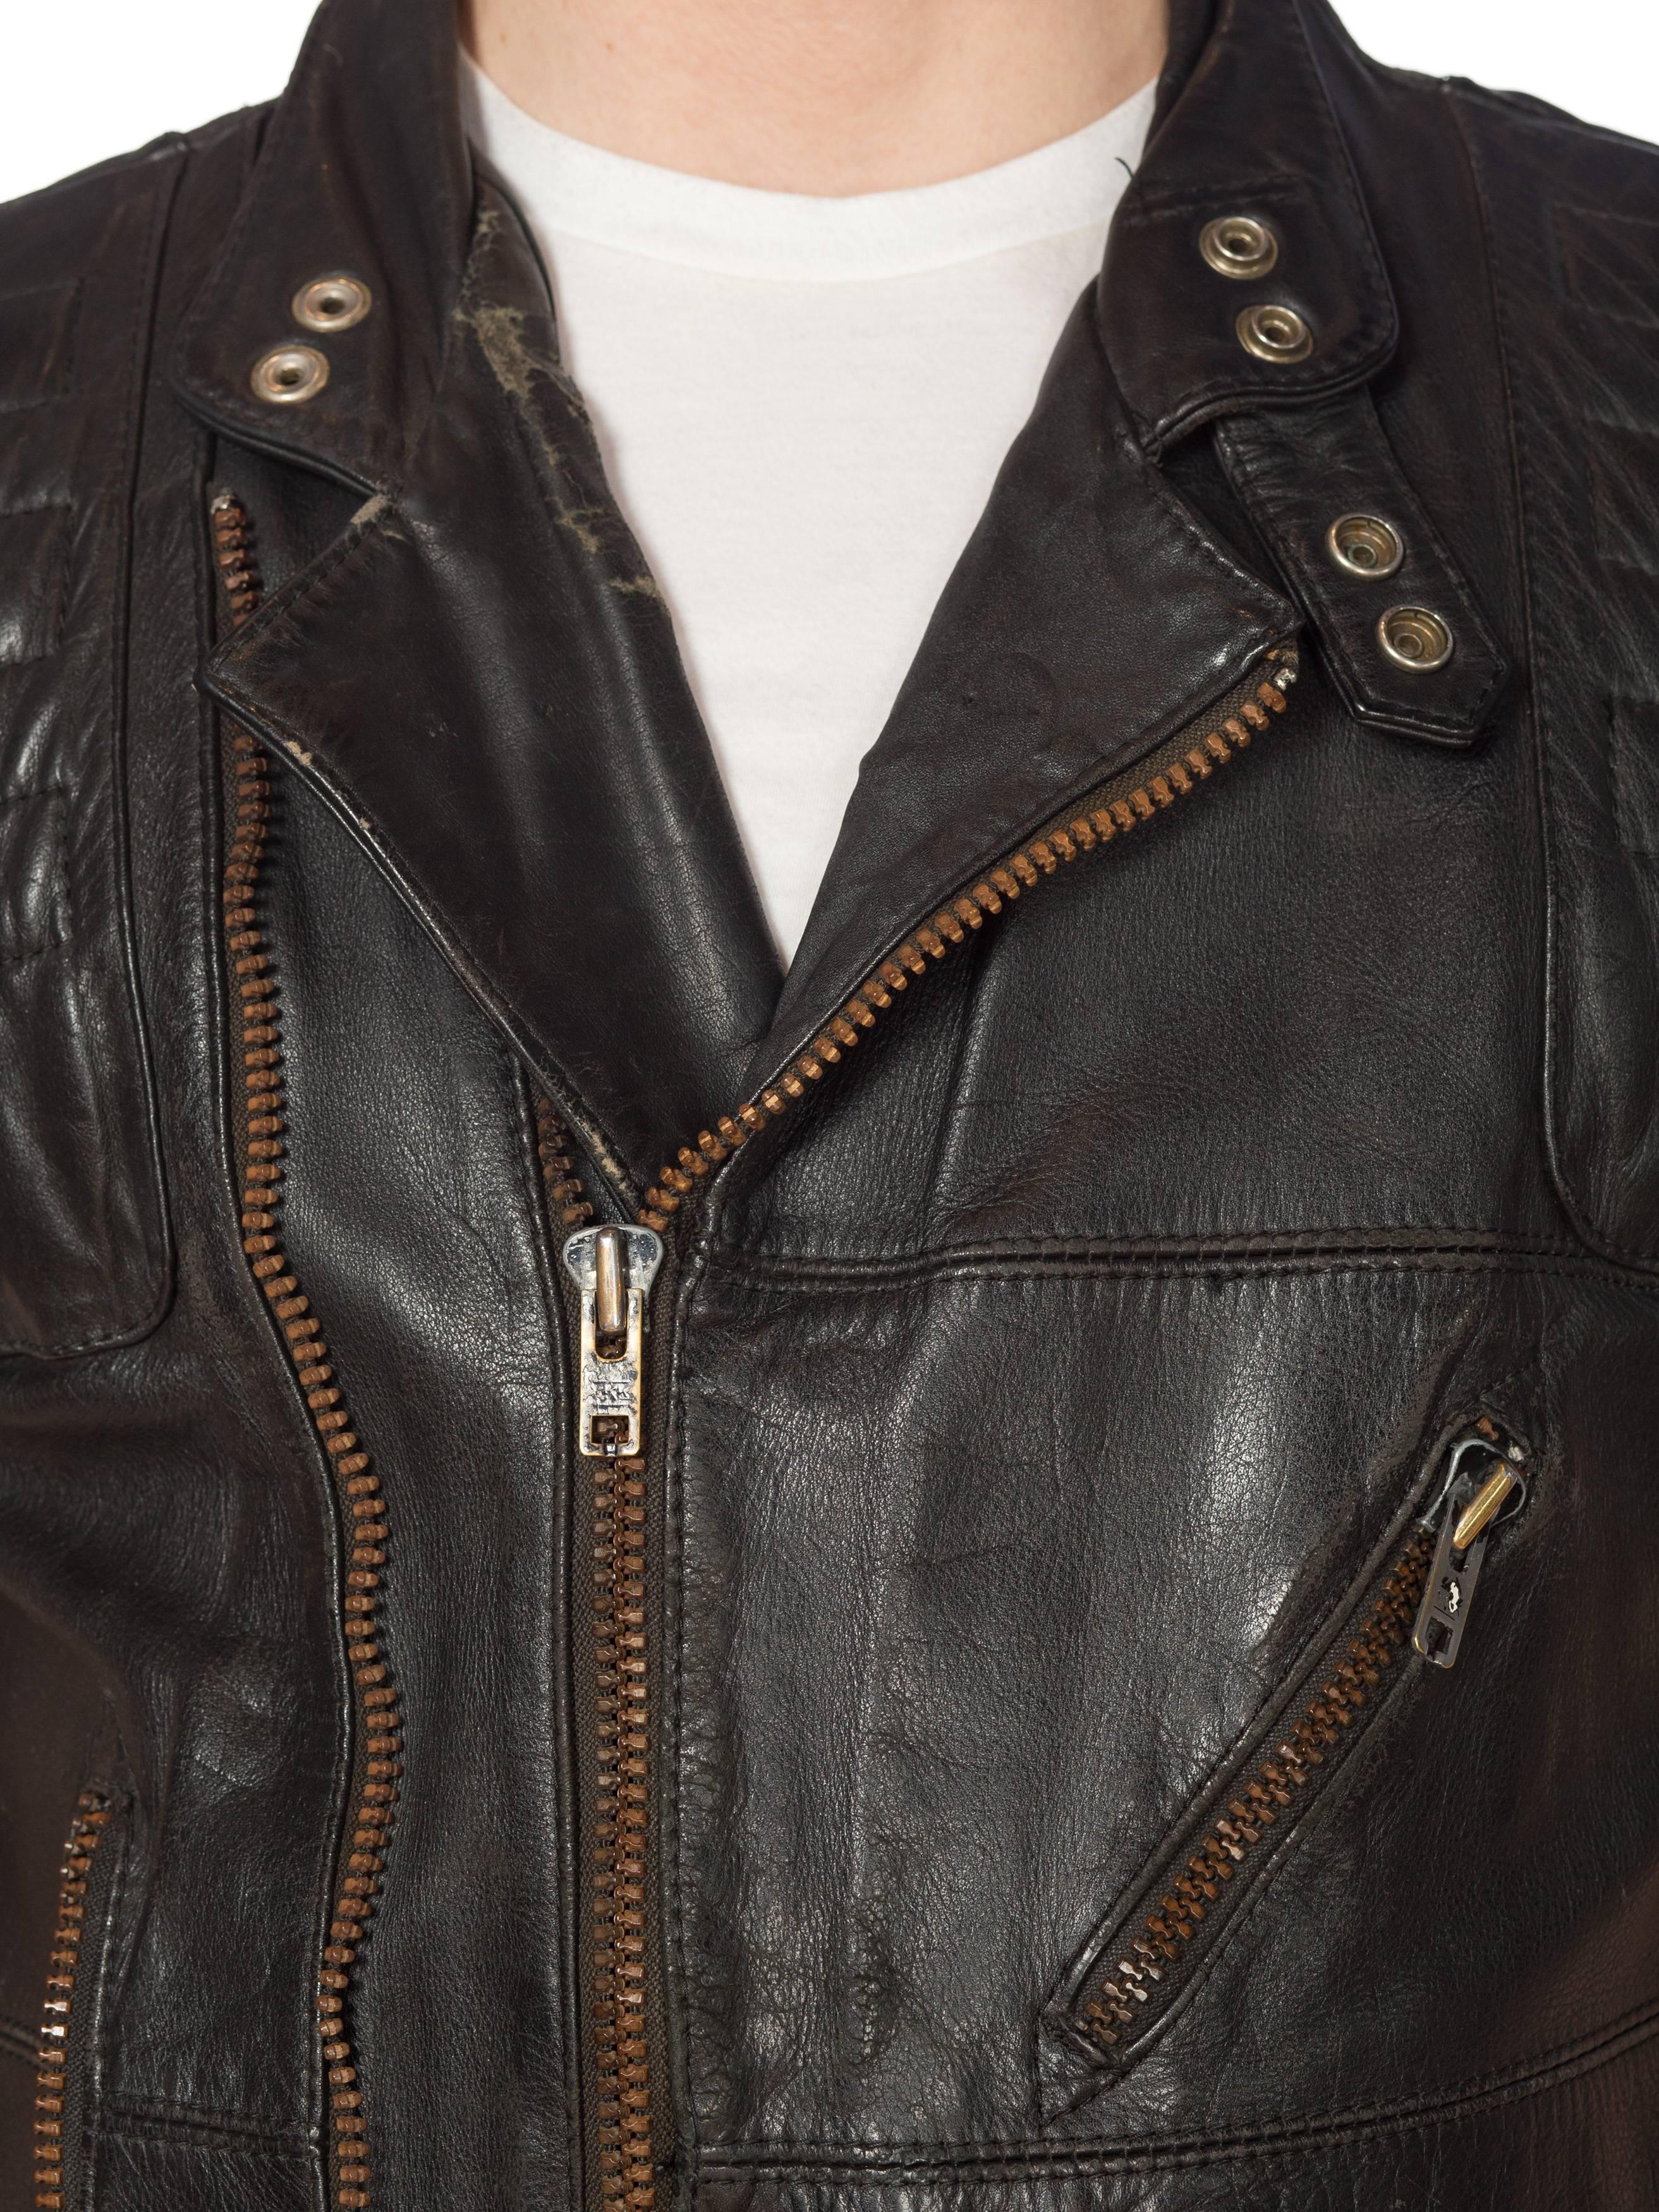 Mens Cropped Sleeve Leather Biker Jacket Formerly Belonging to the Band Justice 10